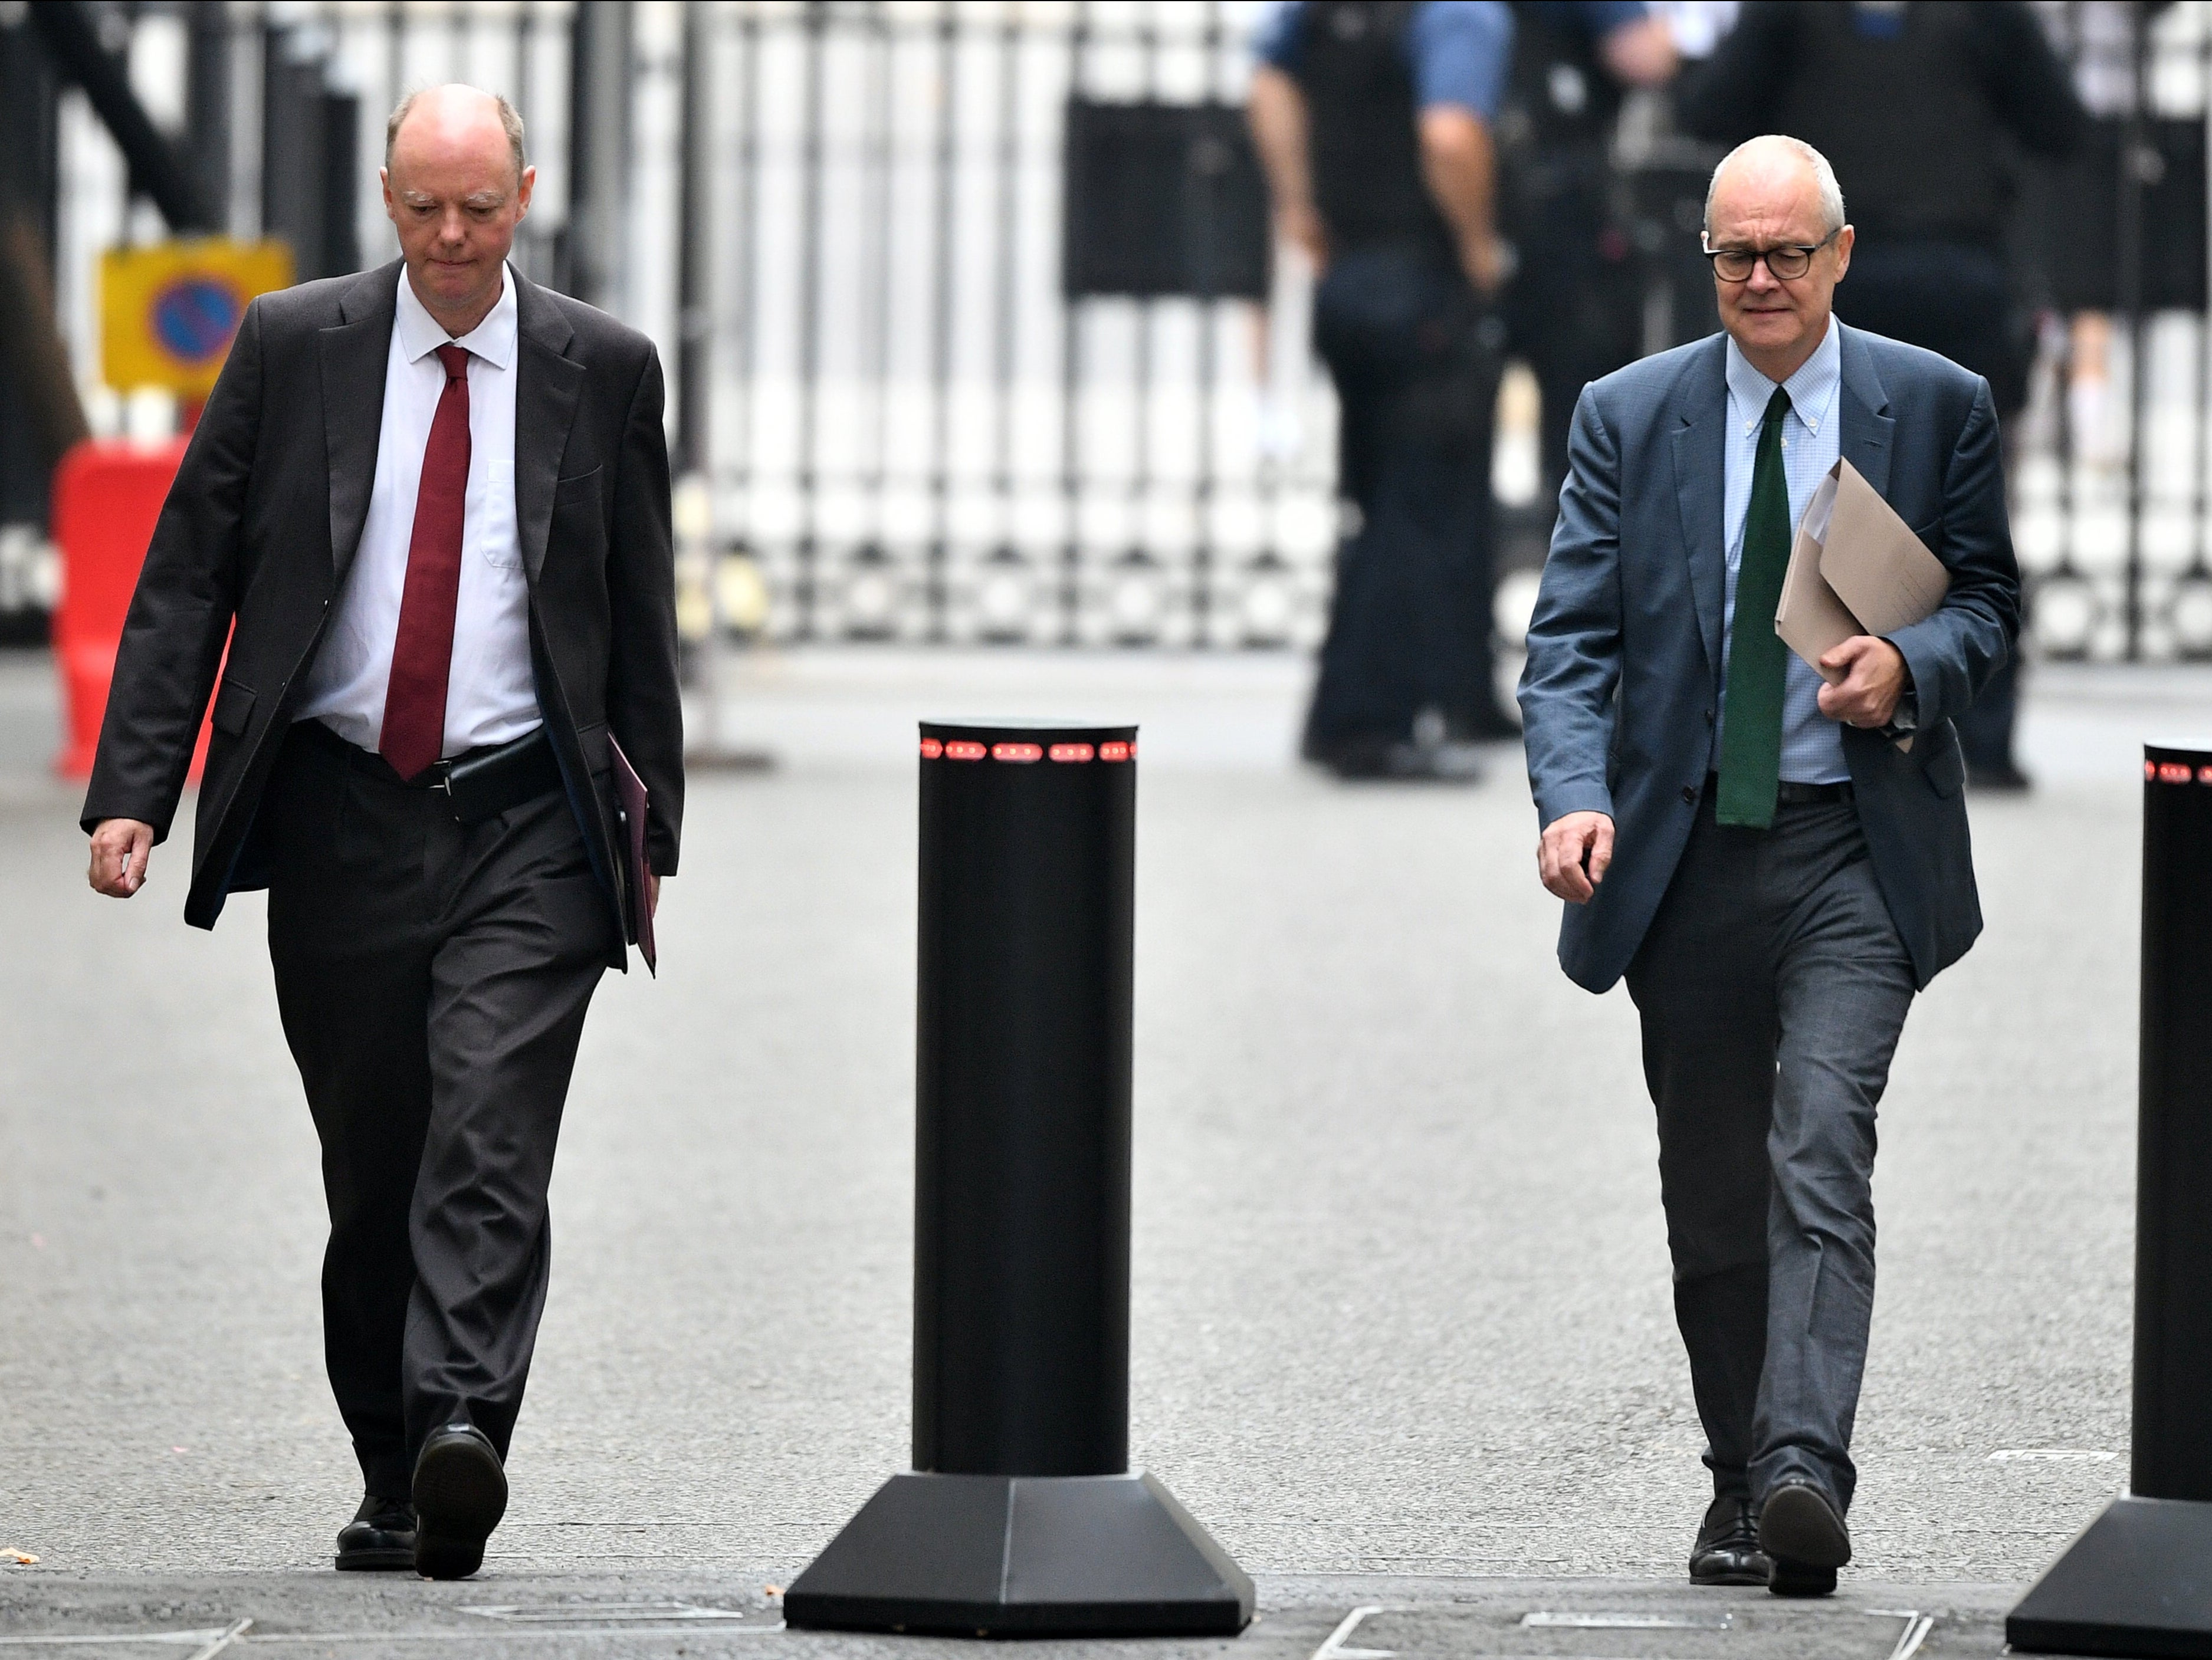 Chris Whitty and Sir Patrick Vallance arrive at Downing Street to deliver a briefing